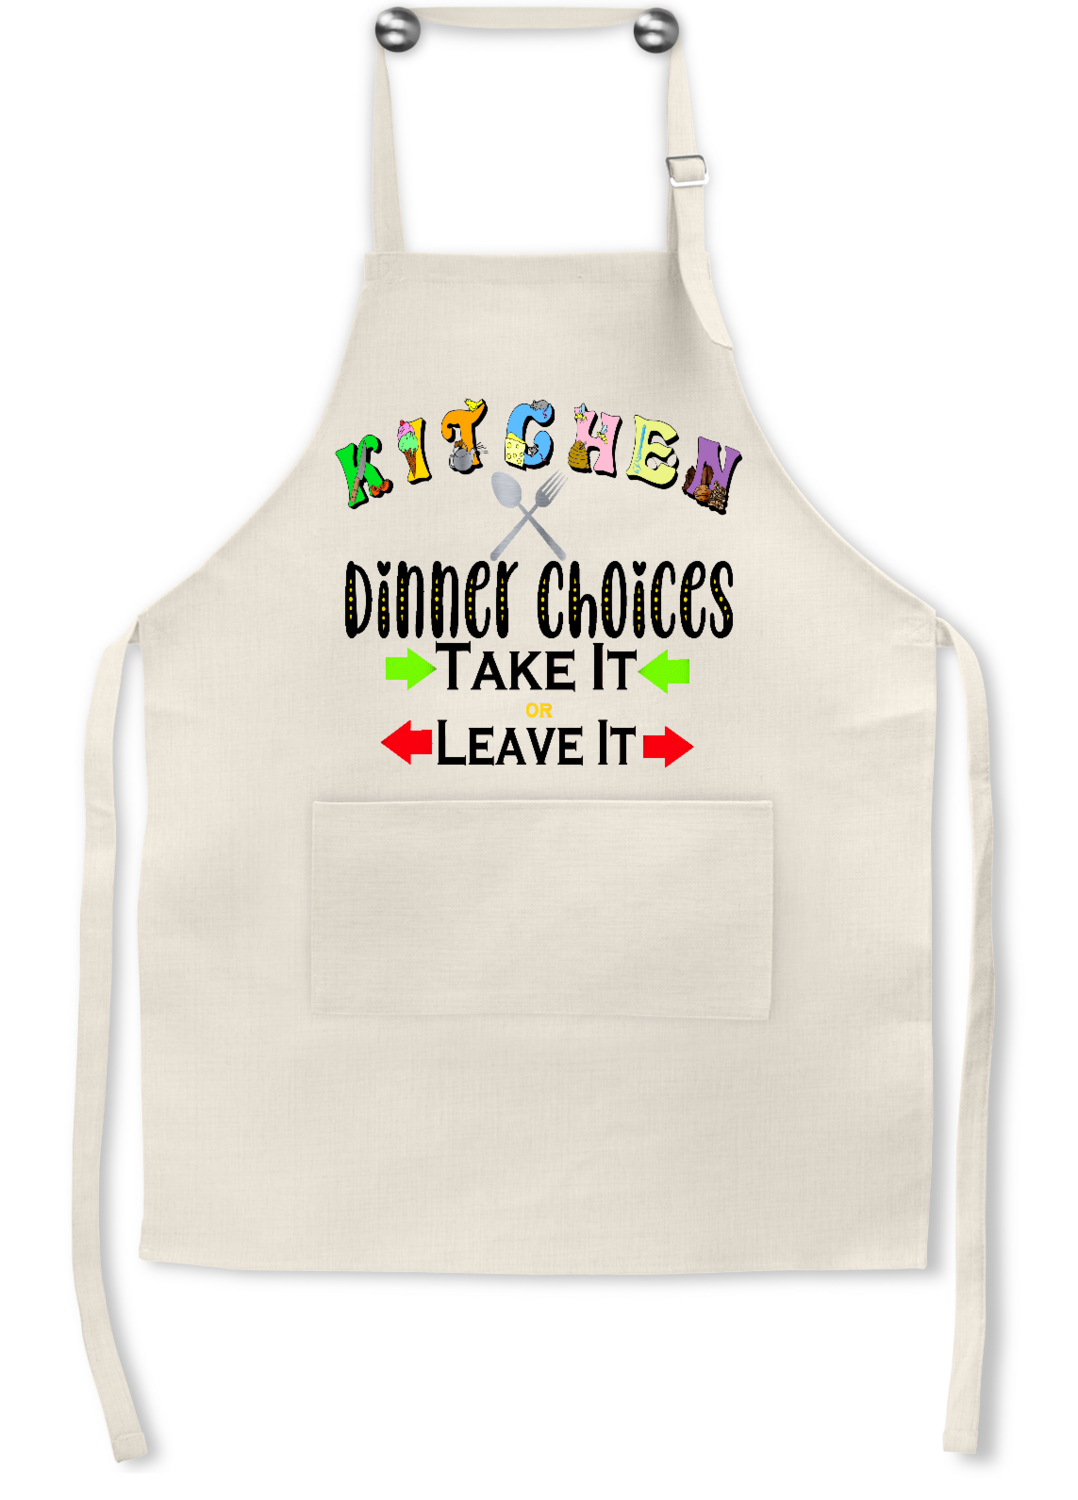 Apron: KITCHEN DINNER CHOICES TAKE IT OR LEAVE IT